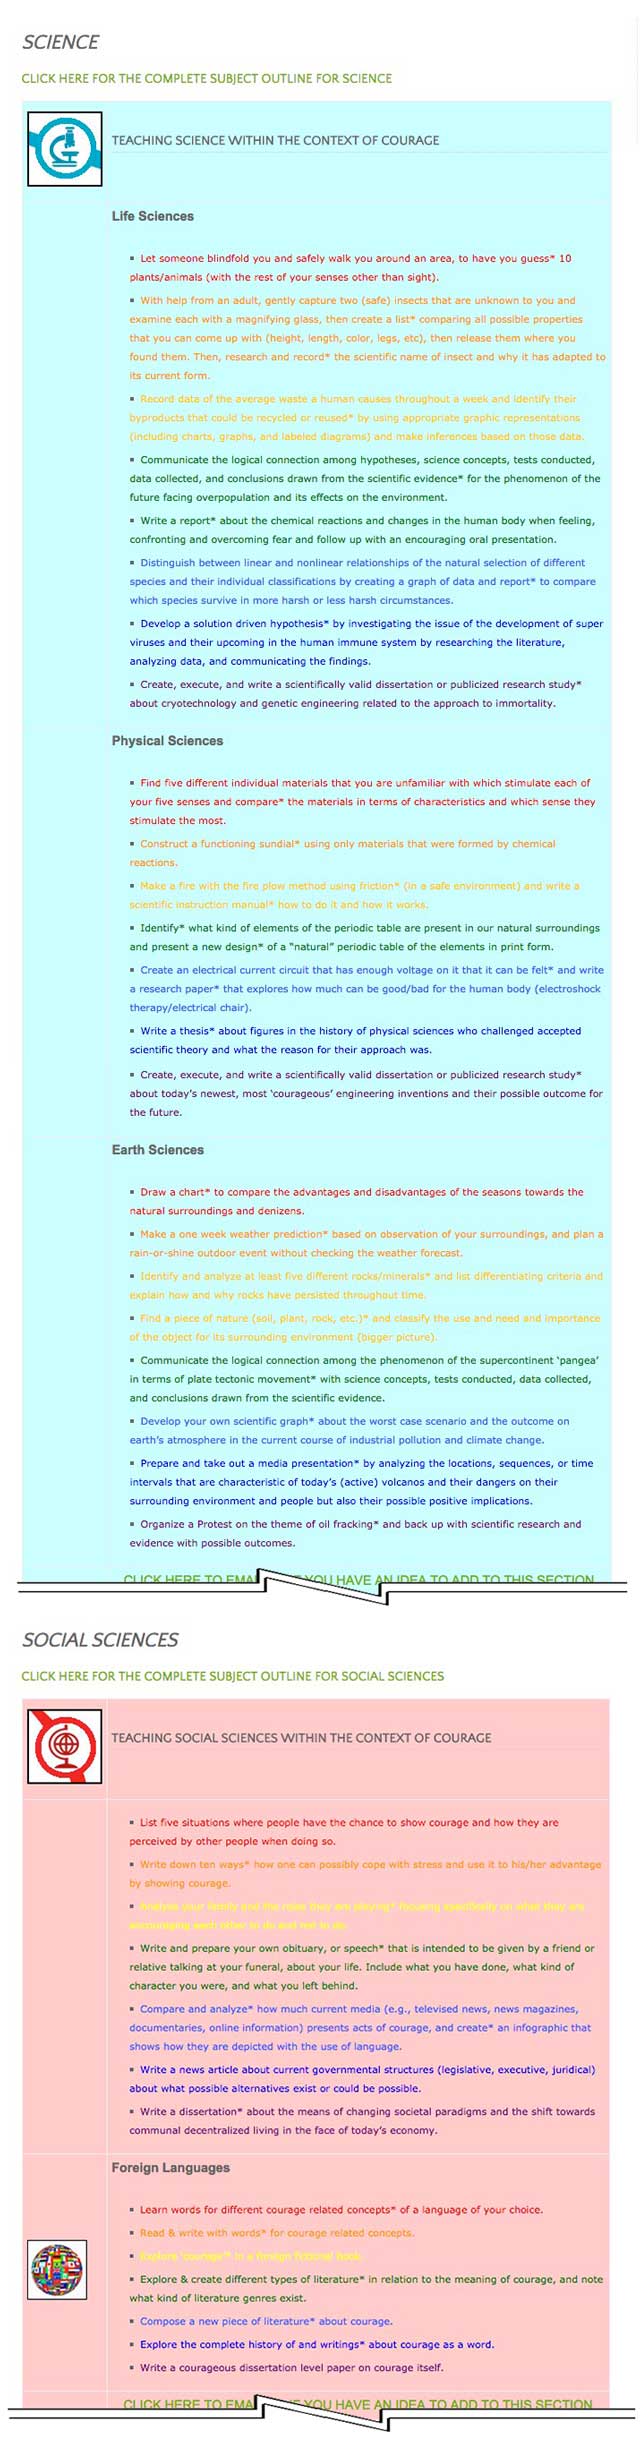 This last week the core team transferred the third 25% of the written content for the Courage Lesson Plan to the website, as you see here. This lesson plan purposed to teach all subjects, to all learning levels, in any learning environment, using the central theme of "Courage" is now 75% completed on our website.